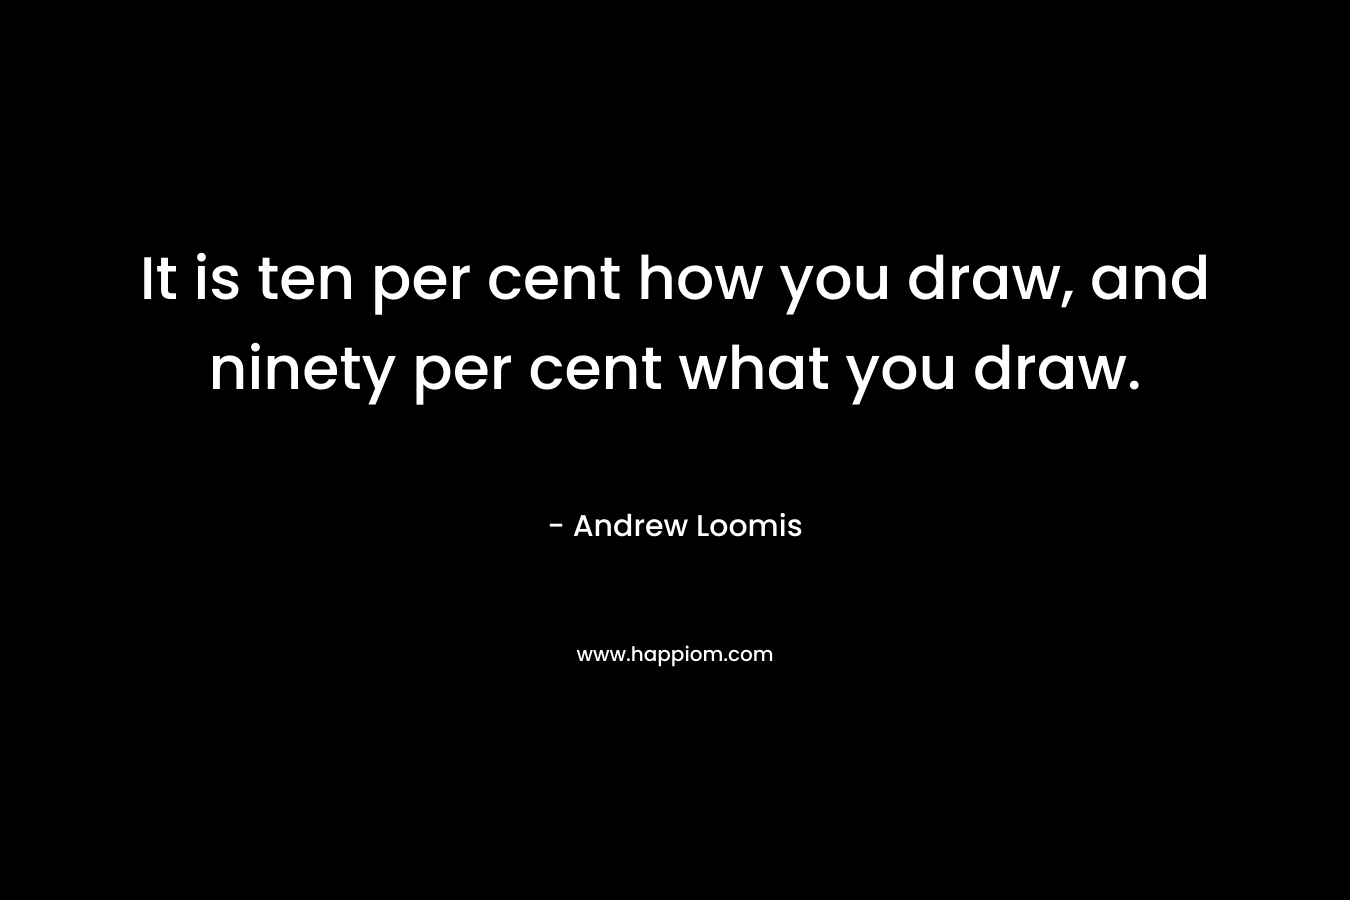 It is ten per cent how you draw, and ninety per cent what you draw.